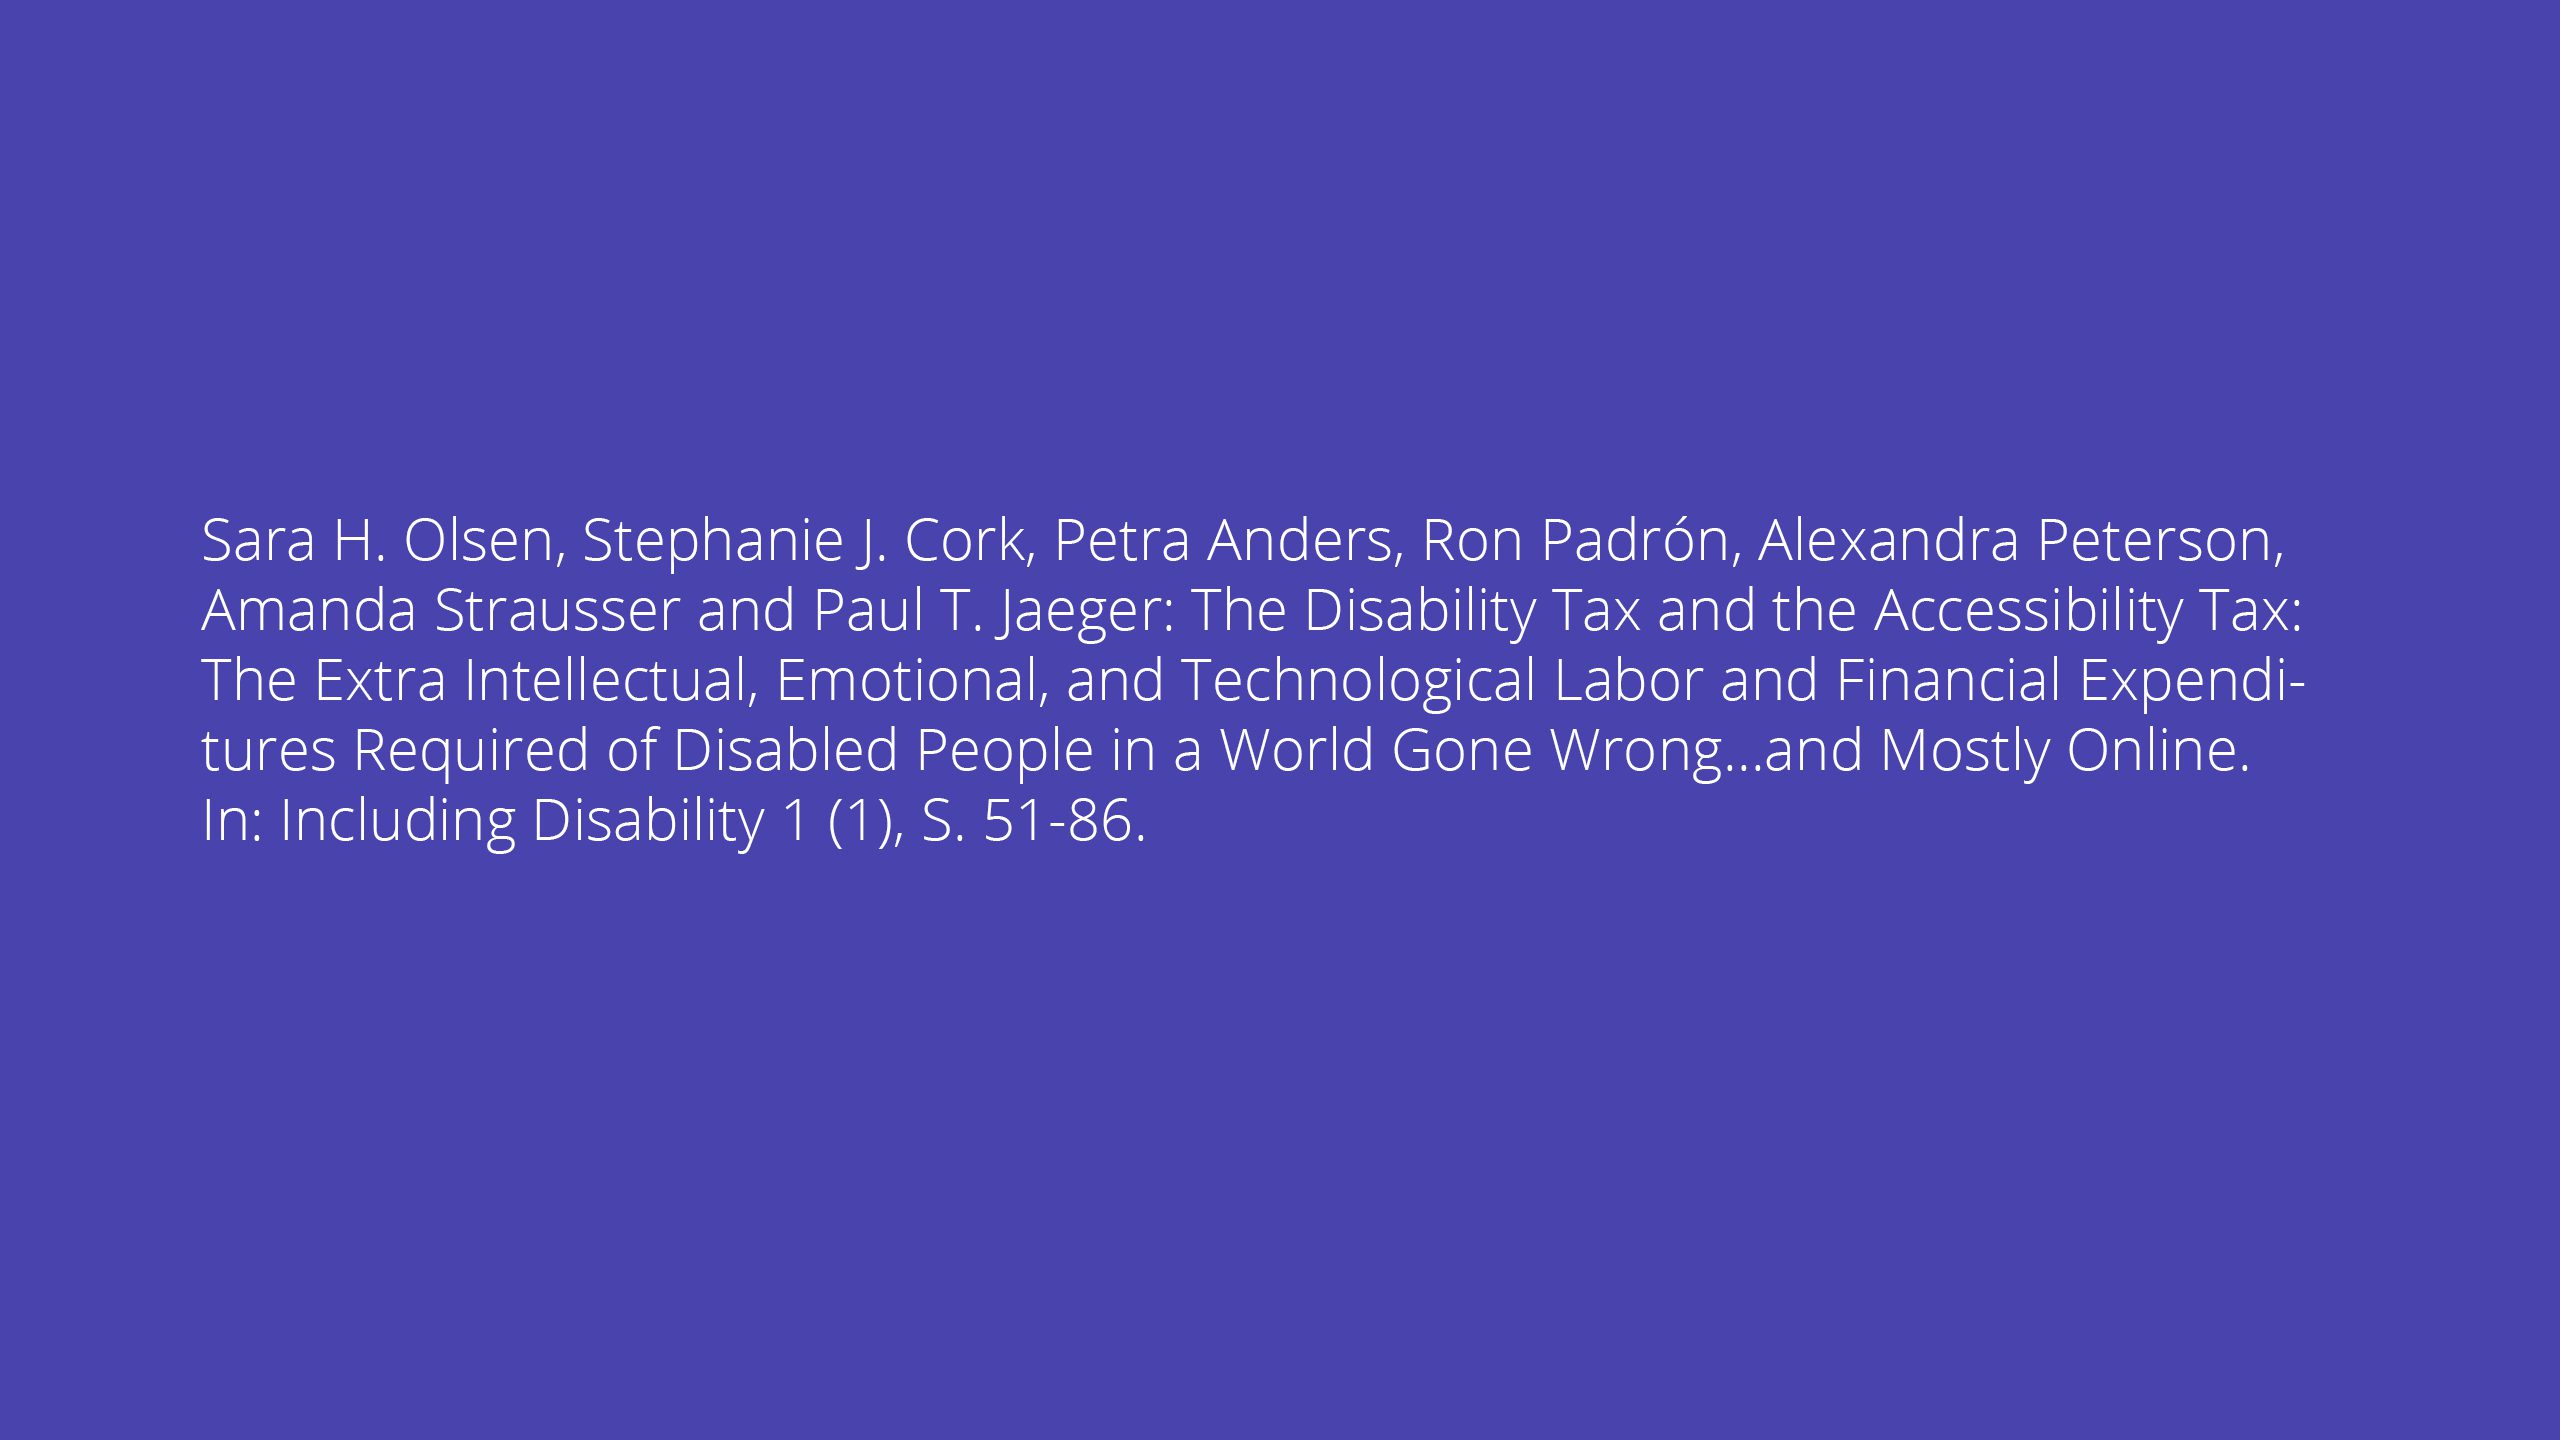 Sara H. Olsen, Stephanie J. Cork, Petra Anders, Ron Padrón, Alexandra Peterson, Amanda Strausser and Paul T. Jaeger: The Disability Tax and the Accessibility Tax: The Extra Intellectual, Emotional, and Technological Labor and Financial Expenditures Required of Disabled People in a World Gone Wrong…and Mostly Online. In: Including Disability 1 (1), S. 51-86.